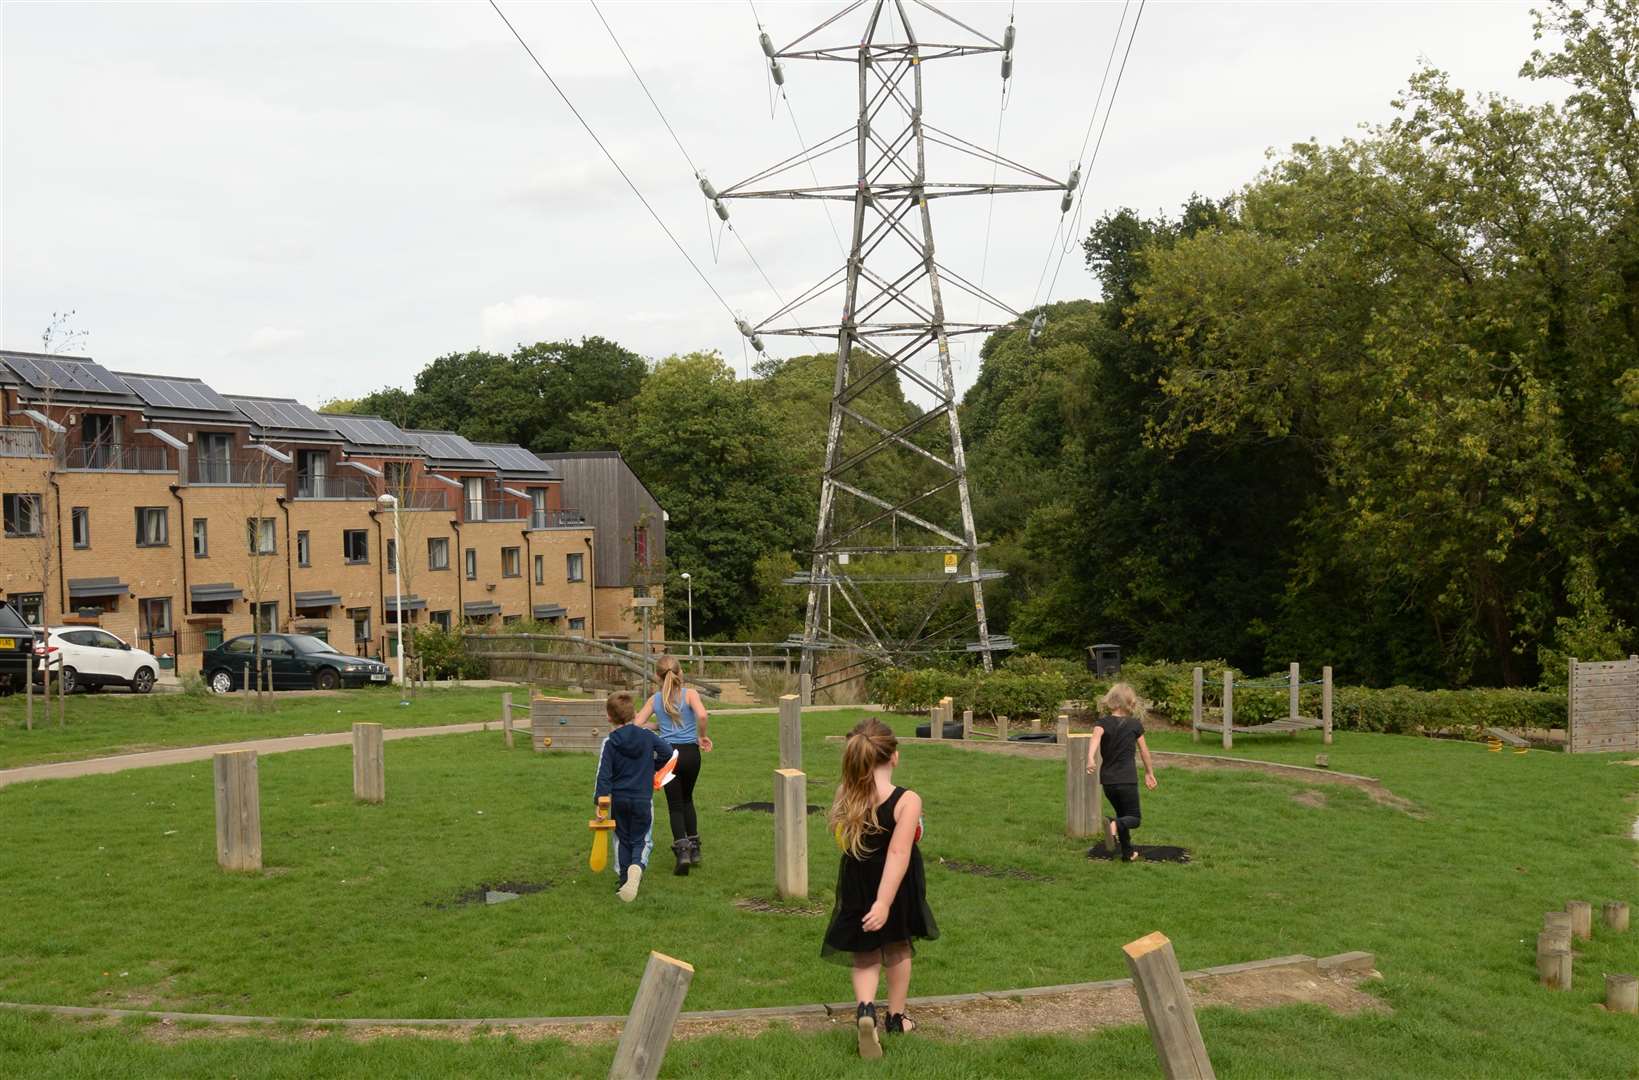 The play area in Greggs Wood Road where children have received electric shocks. Picture: Chris Davey